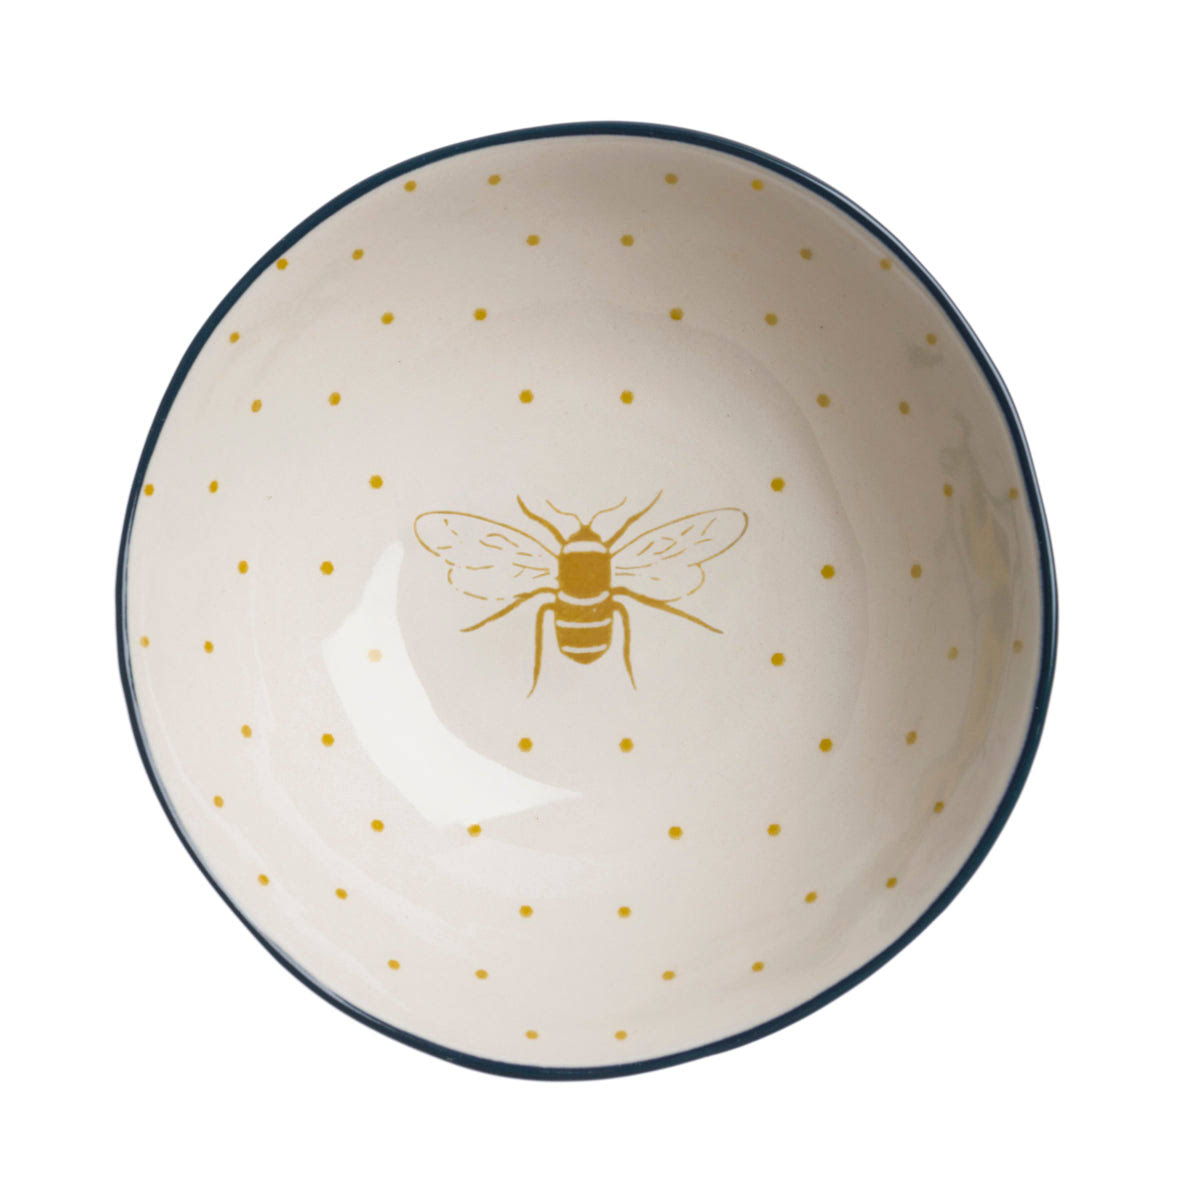 Bees Stoneware Nibbles Bowl by Sophie Allport